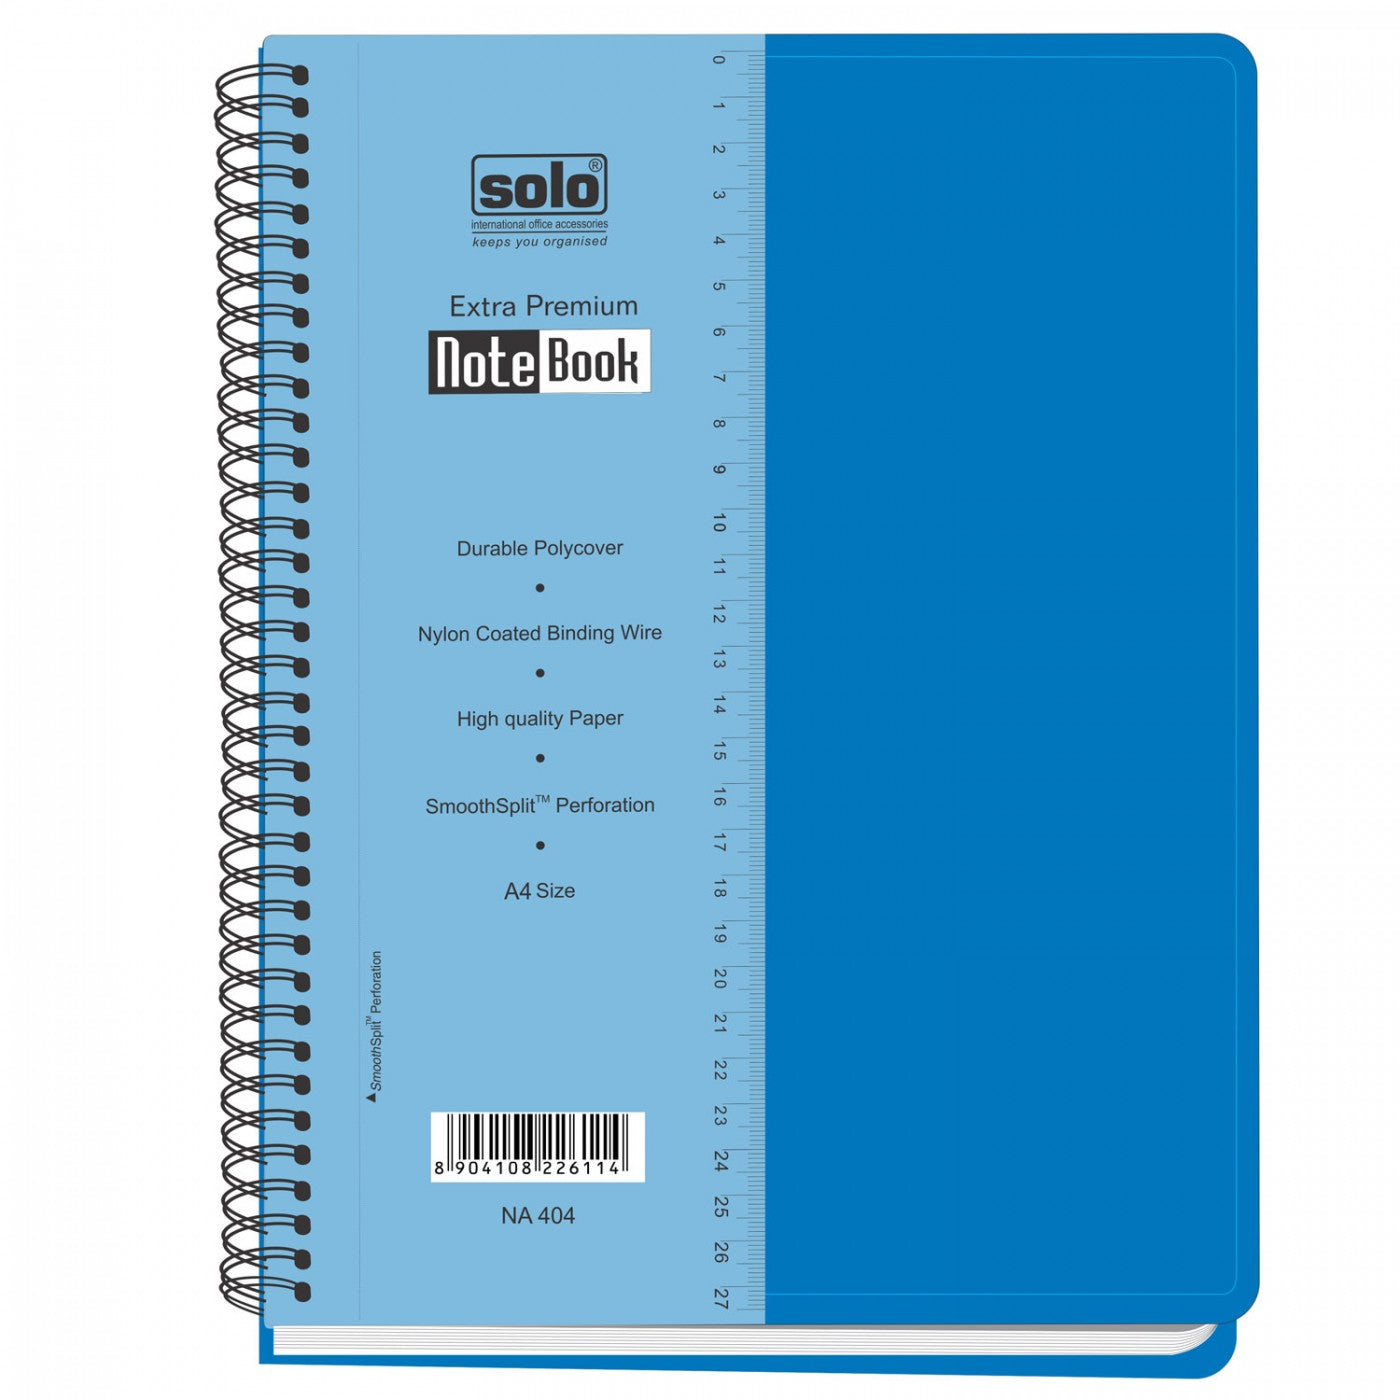 Detec™ Solo Premium Note Book 160 Pages, Square 28*21.5cm NA404 Pack of 10